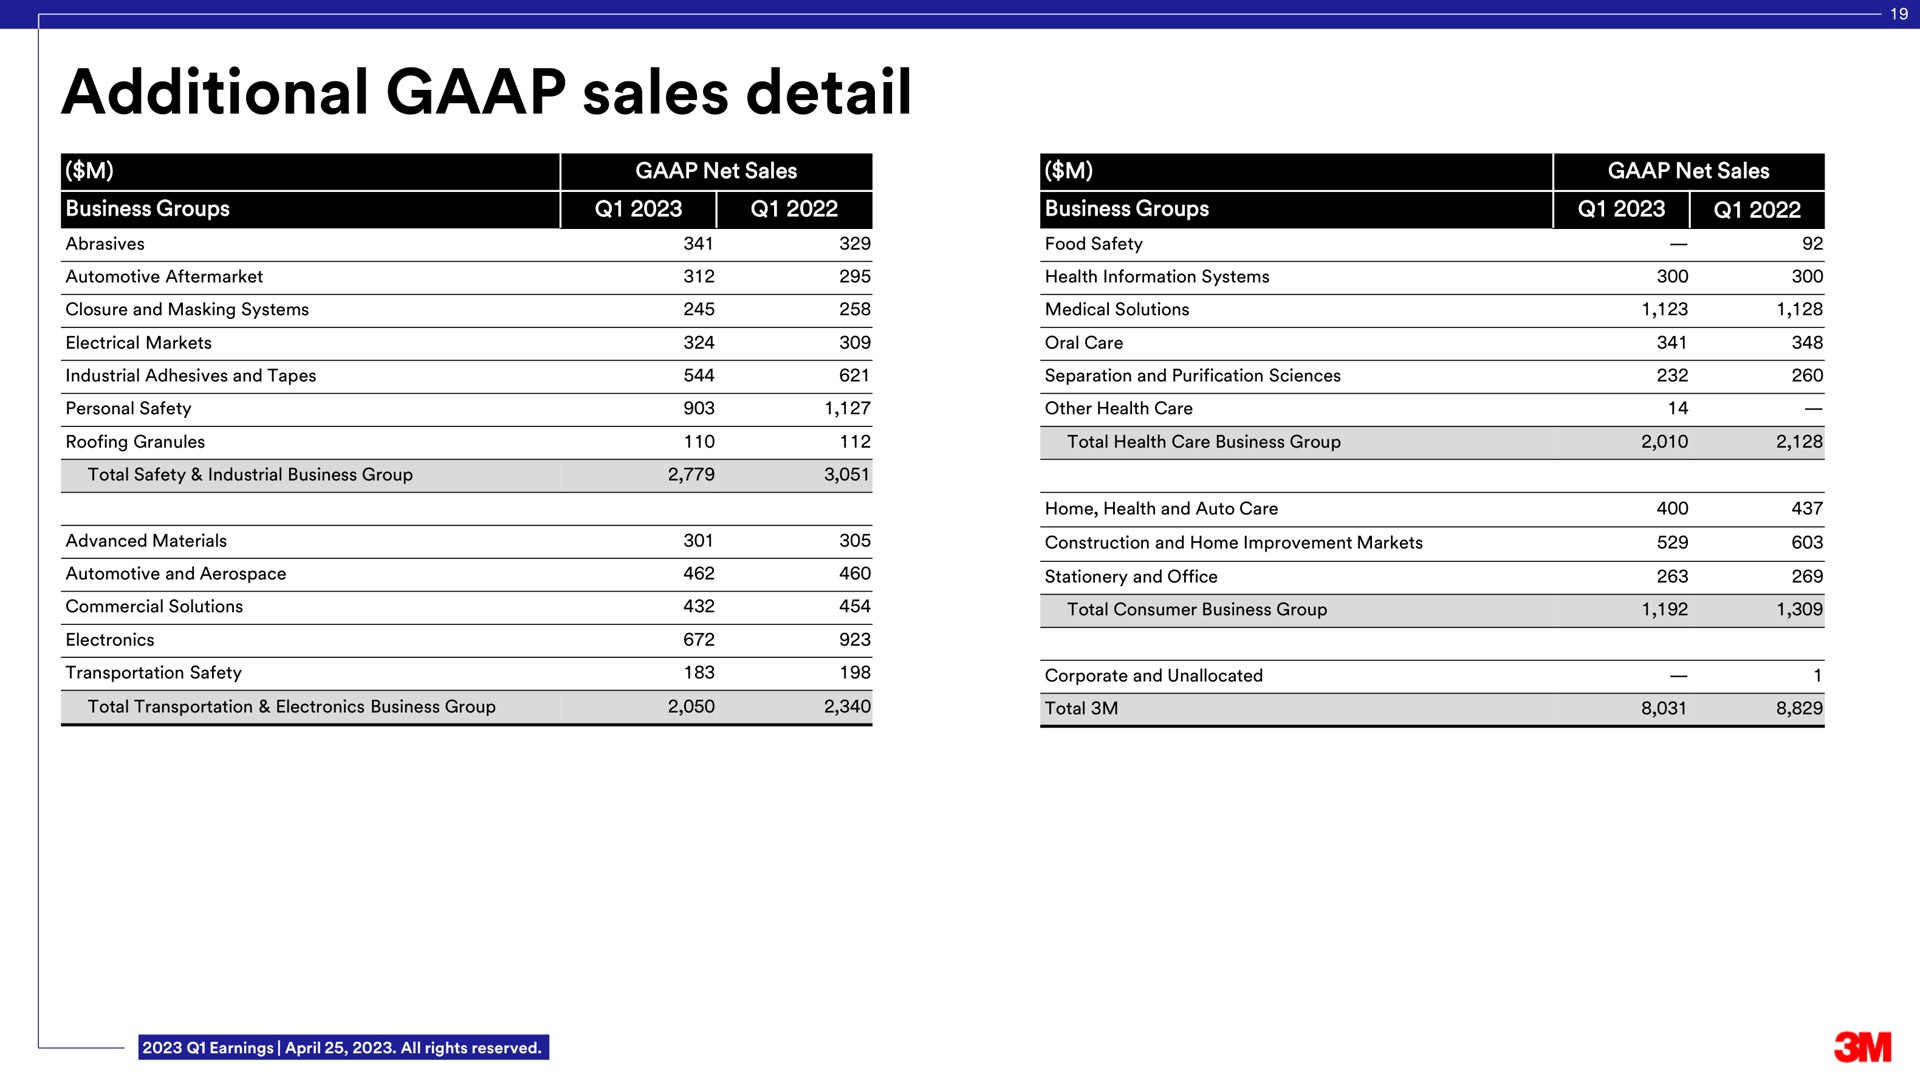 additional sales detail | 3M